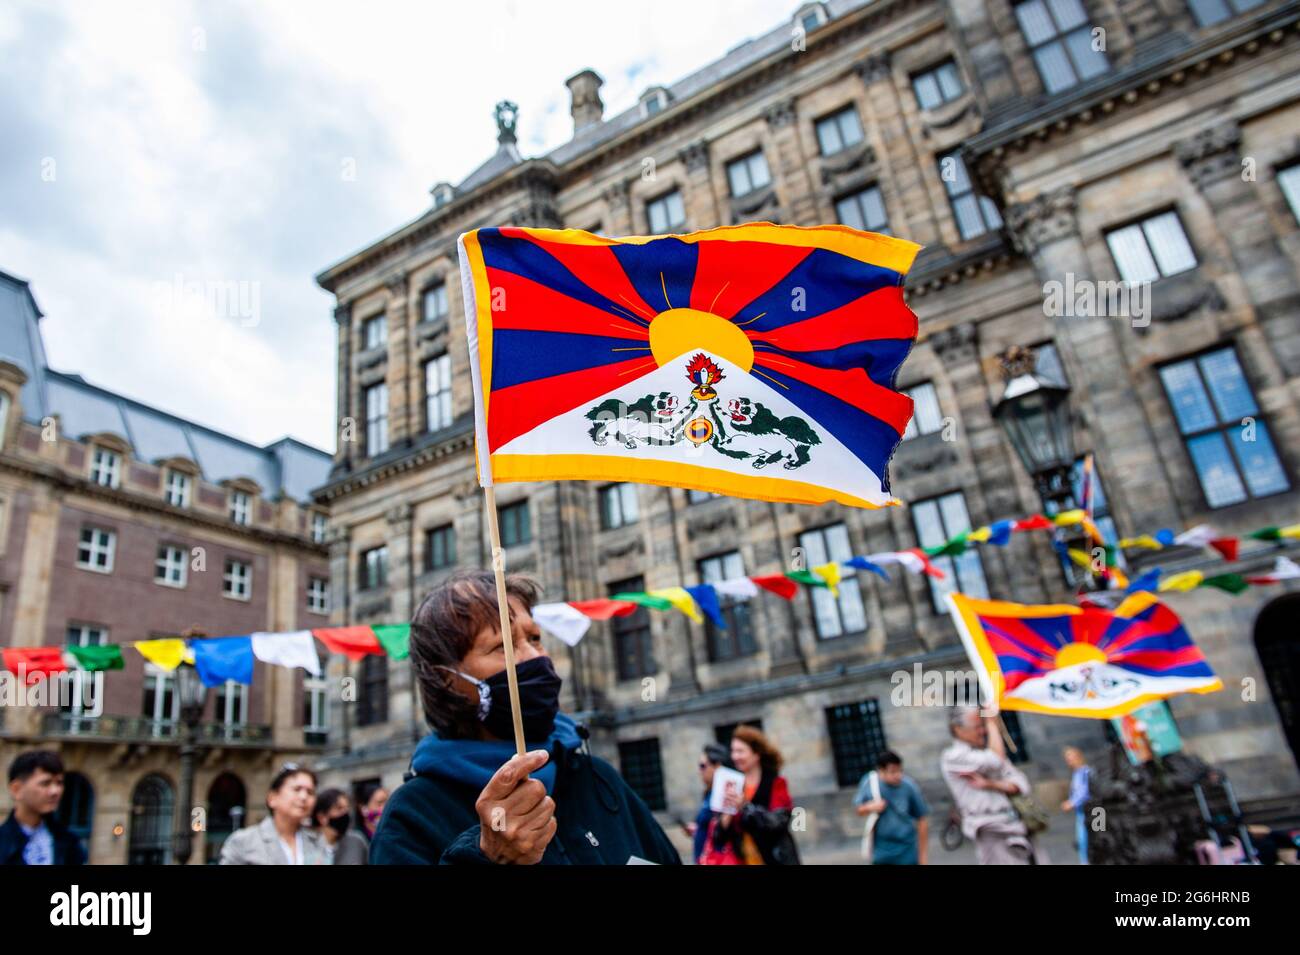 Amsterdam, Netherlands. 06th July, 2021. A Tibetan woman holding a Tibetan flag, during the celebration. To celebrate Dalai Lama's 86th birthday, and his decades of work for human rights, justice, and peace, a big event was organized in Amsterdam. Hundreds of people gathered at the Dam square in the center of the city that was decorated with colorful Tibetan flags. During the celebration a Sangsol ceremony was carried out by a Tibetan monk, and to end the ceremony a traditional Tibetan dance was performed by the Tibetan community in the Netherlands. Credit: SOPA Images Limited/Alamy Live News Stock Photo